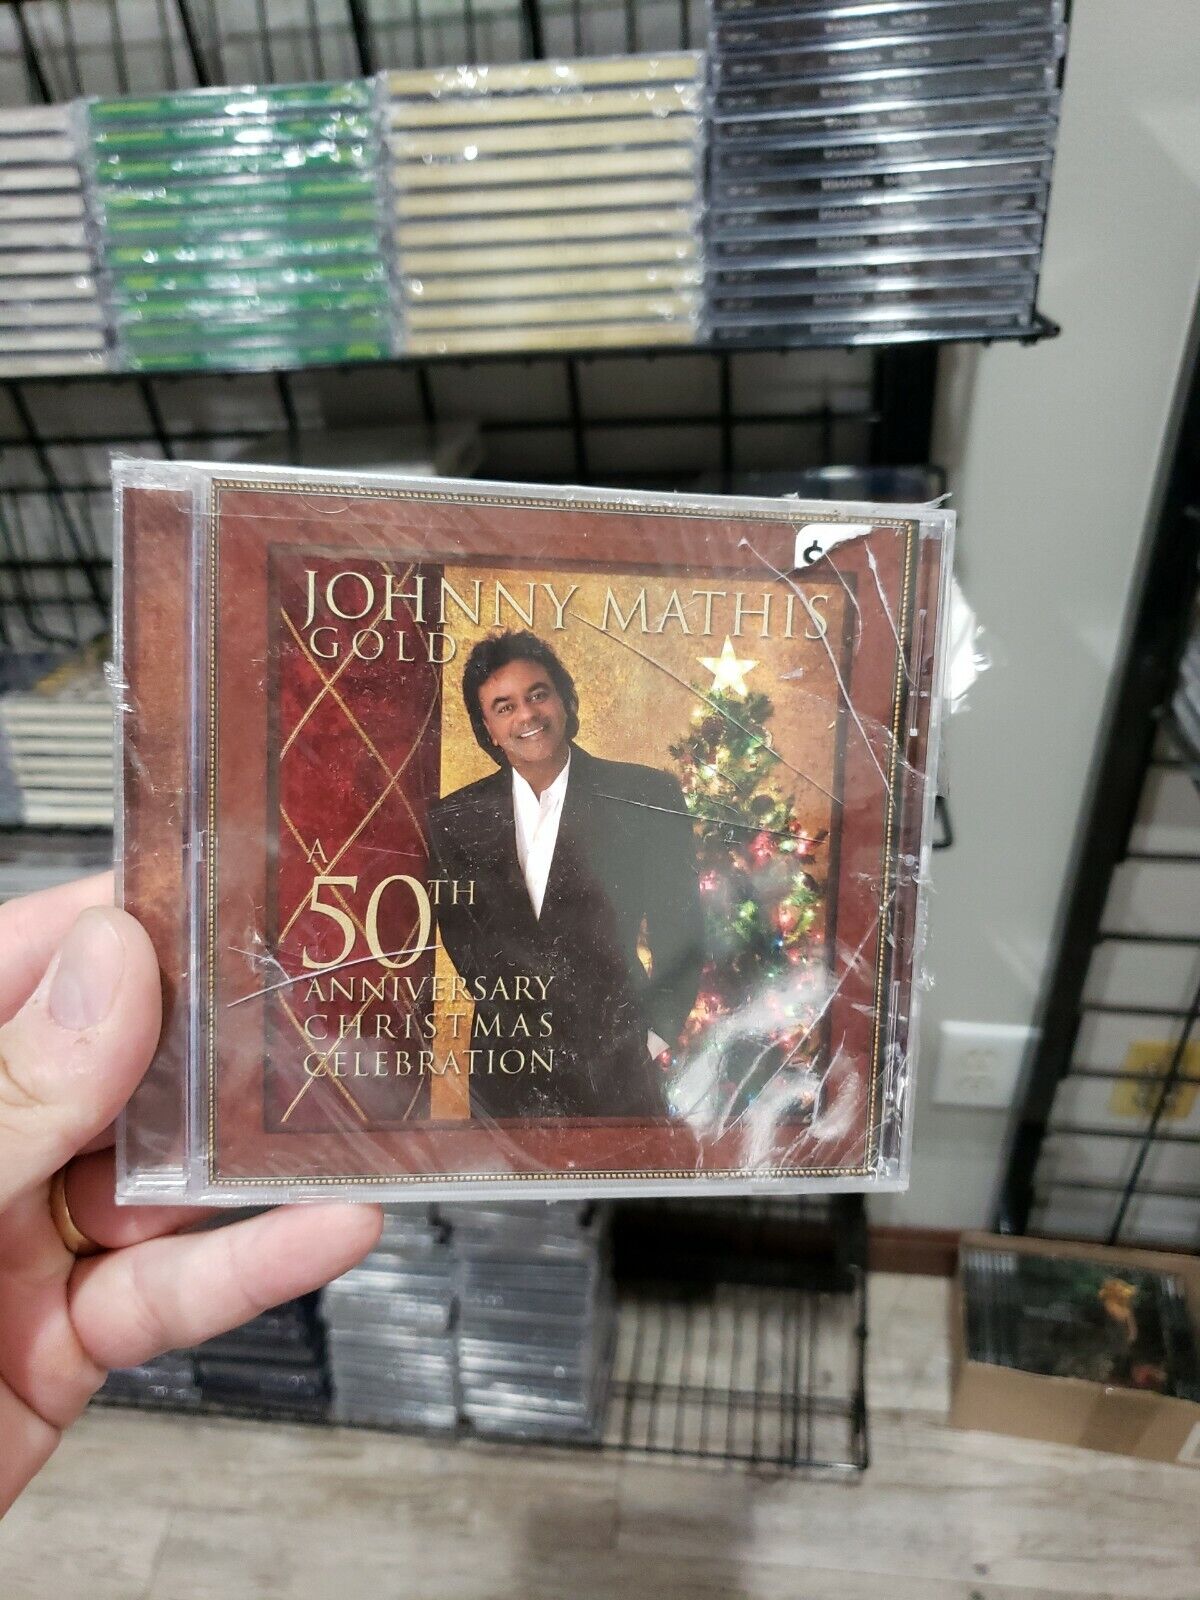 Johnny Mathis Gold: A 50th Anniversary Christmas Celebration (CD) *Cracked Case